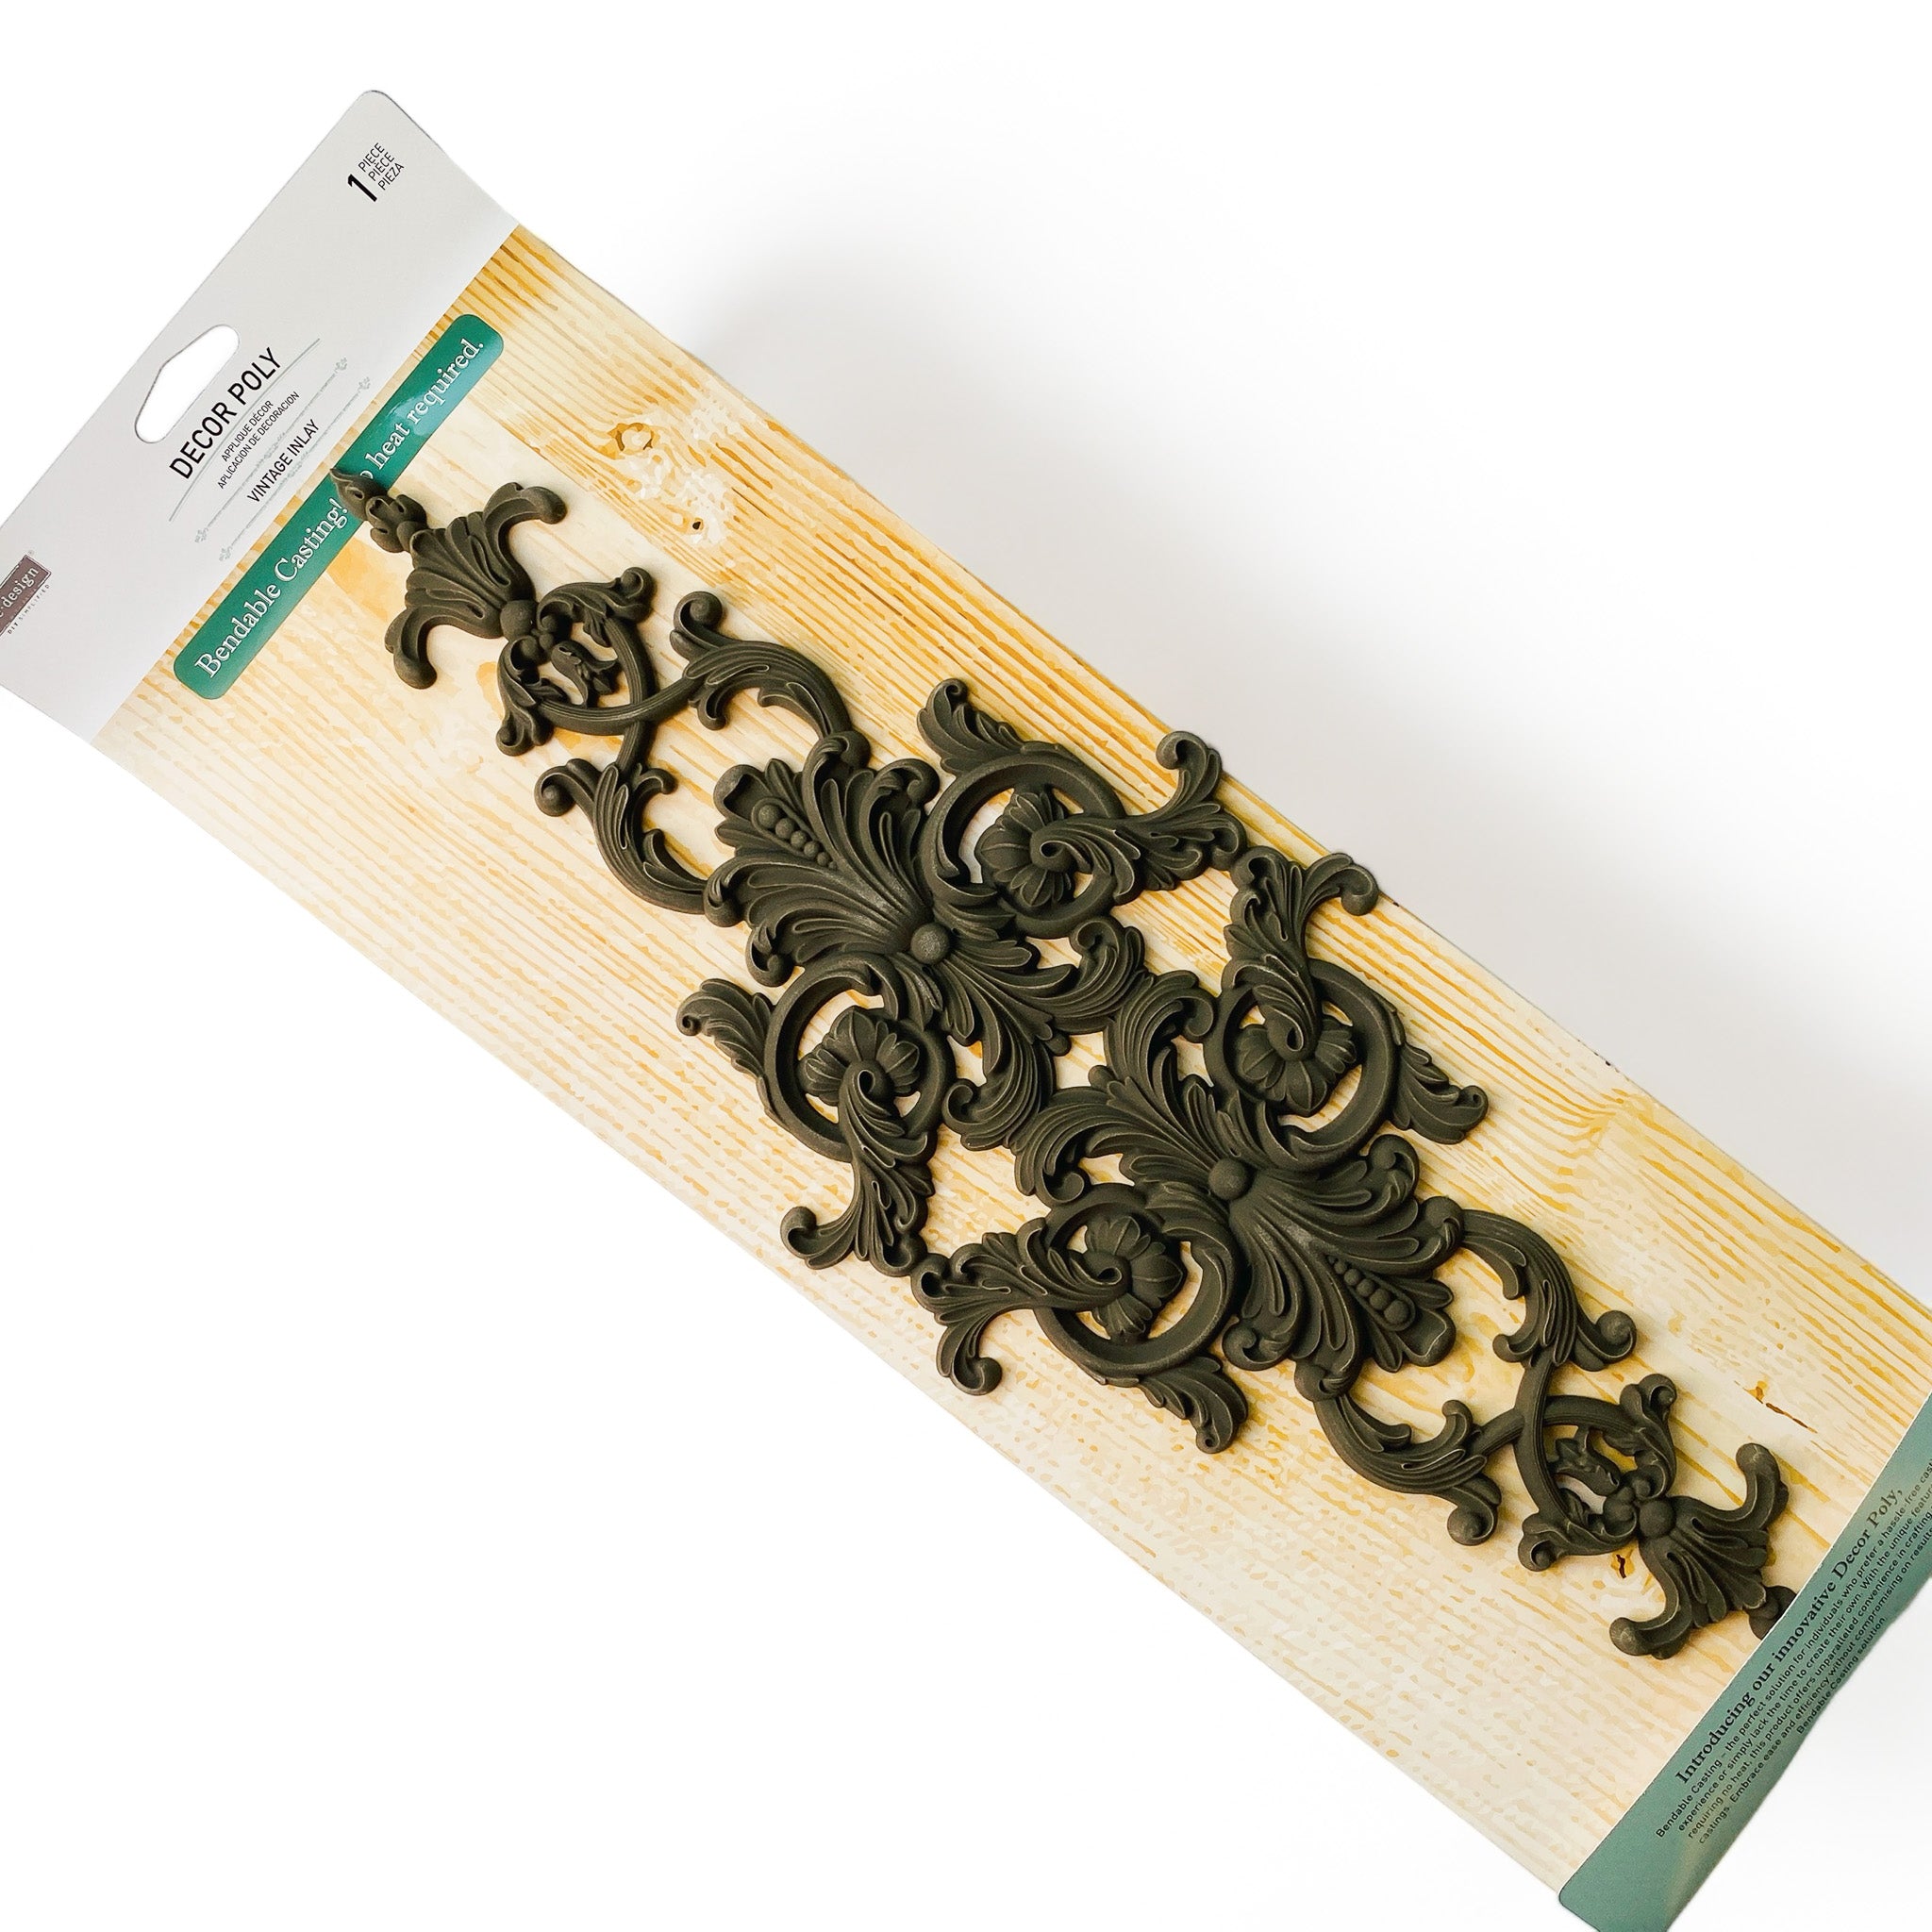 A package of ReDesign with Prima's Vintage Inlay Decor Poly Casting is against a white background.